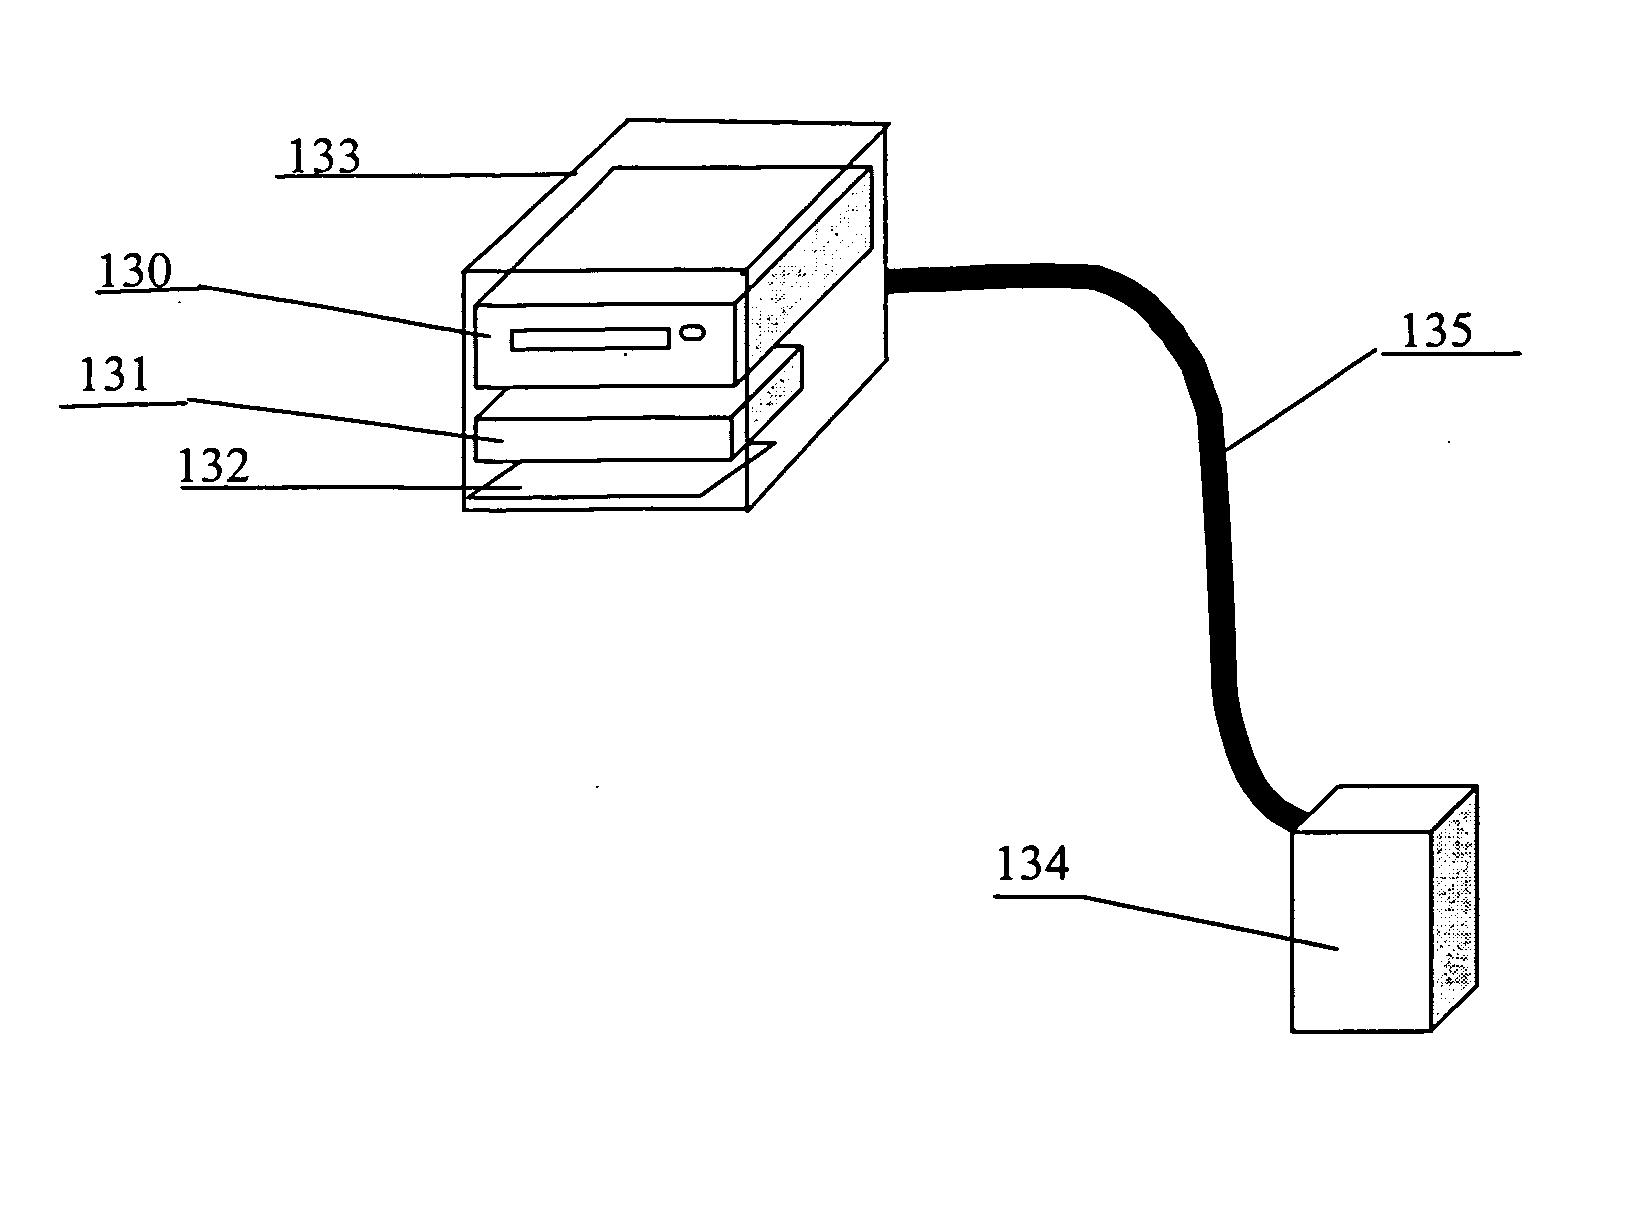 Disk drive with integrated tape drive